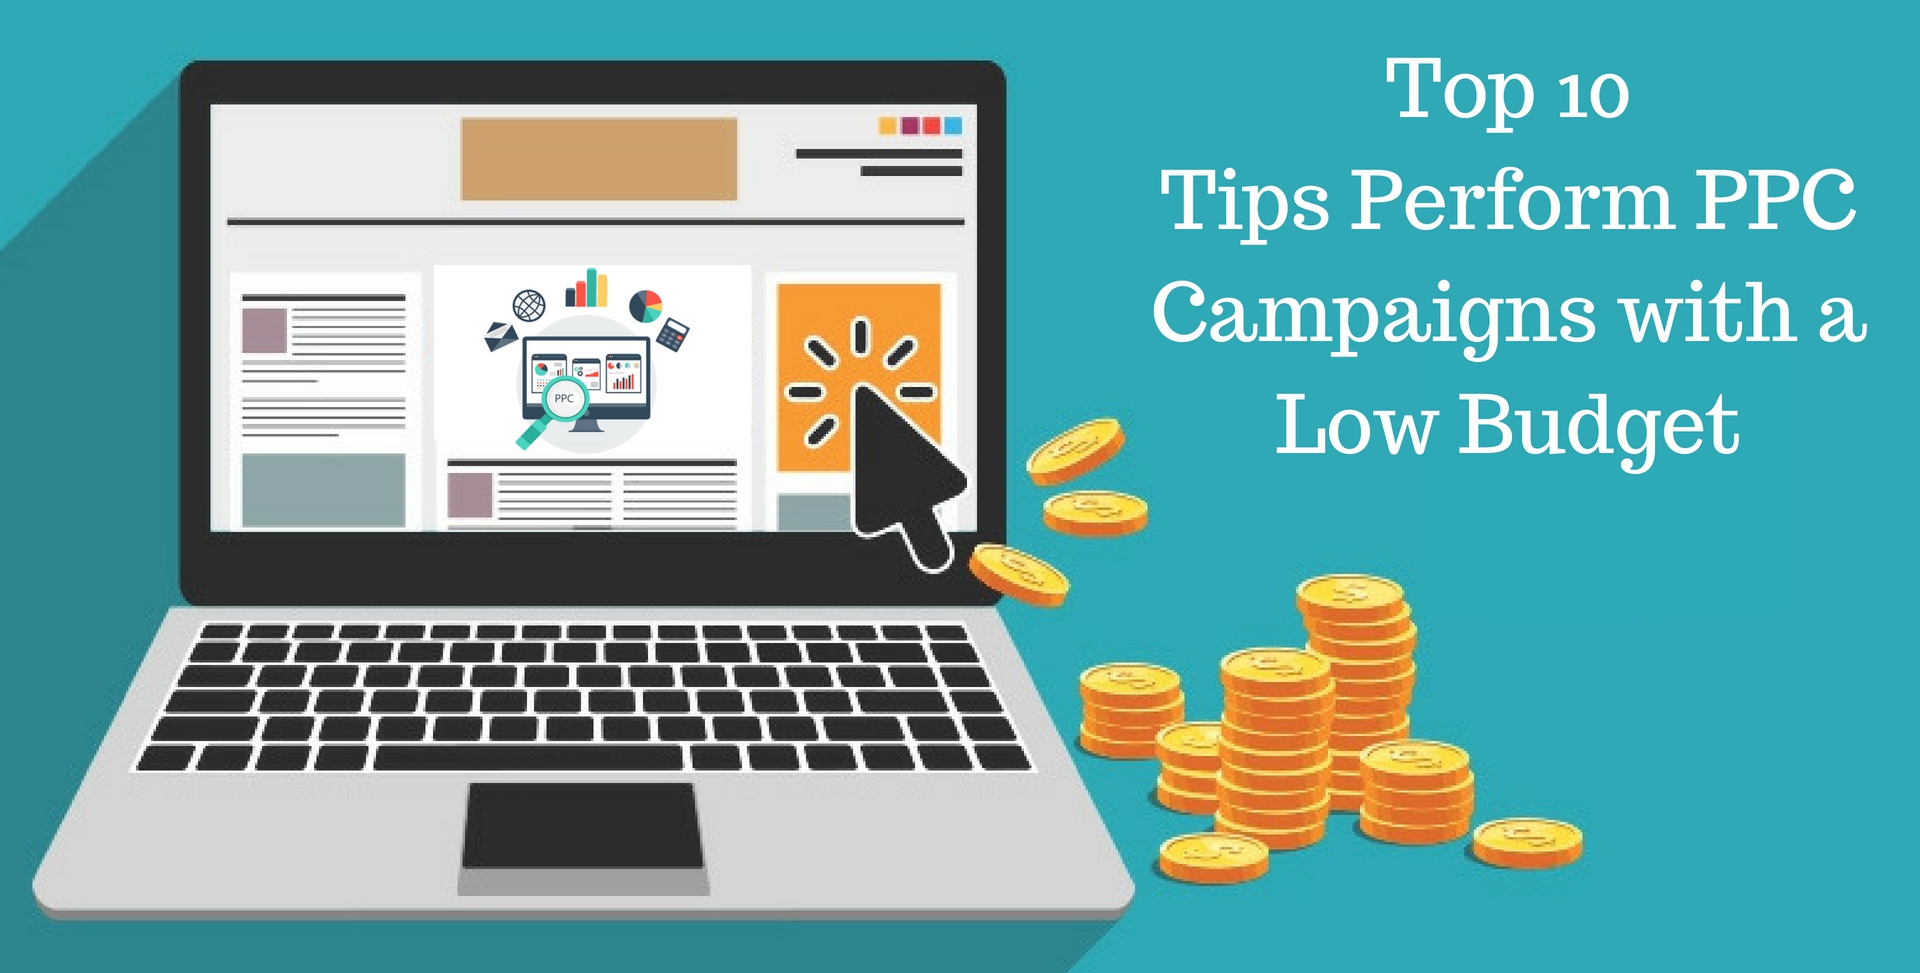 Blog on PPC Campaigns